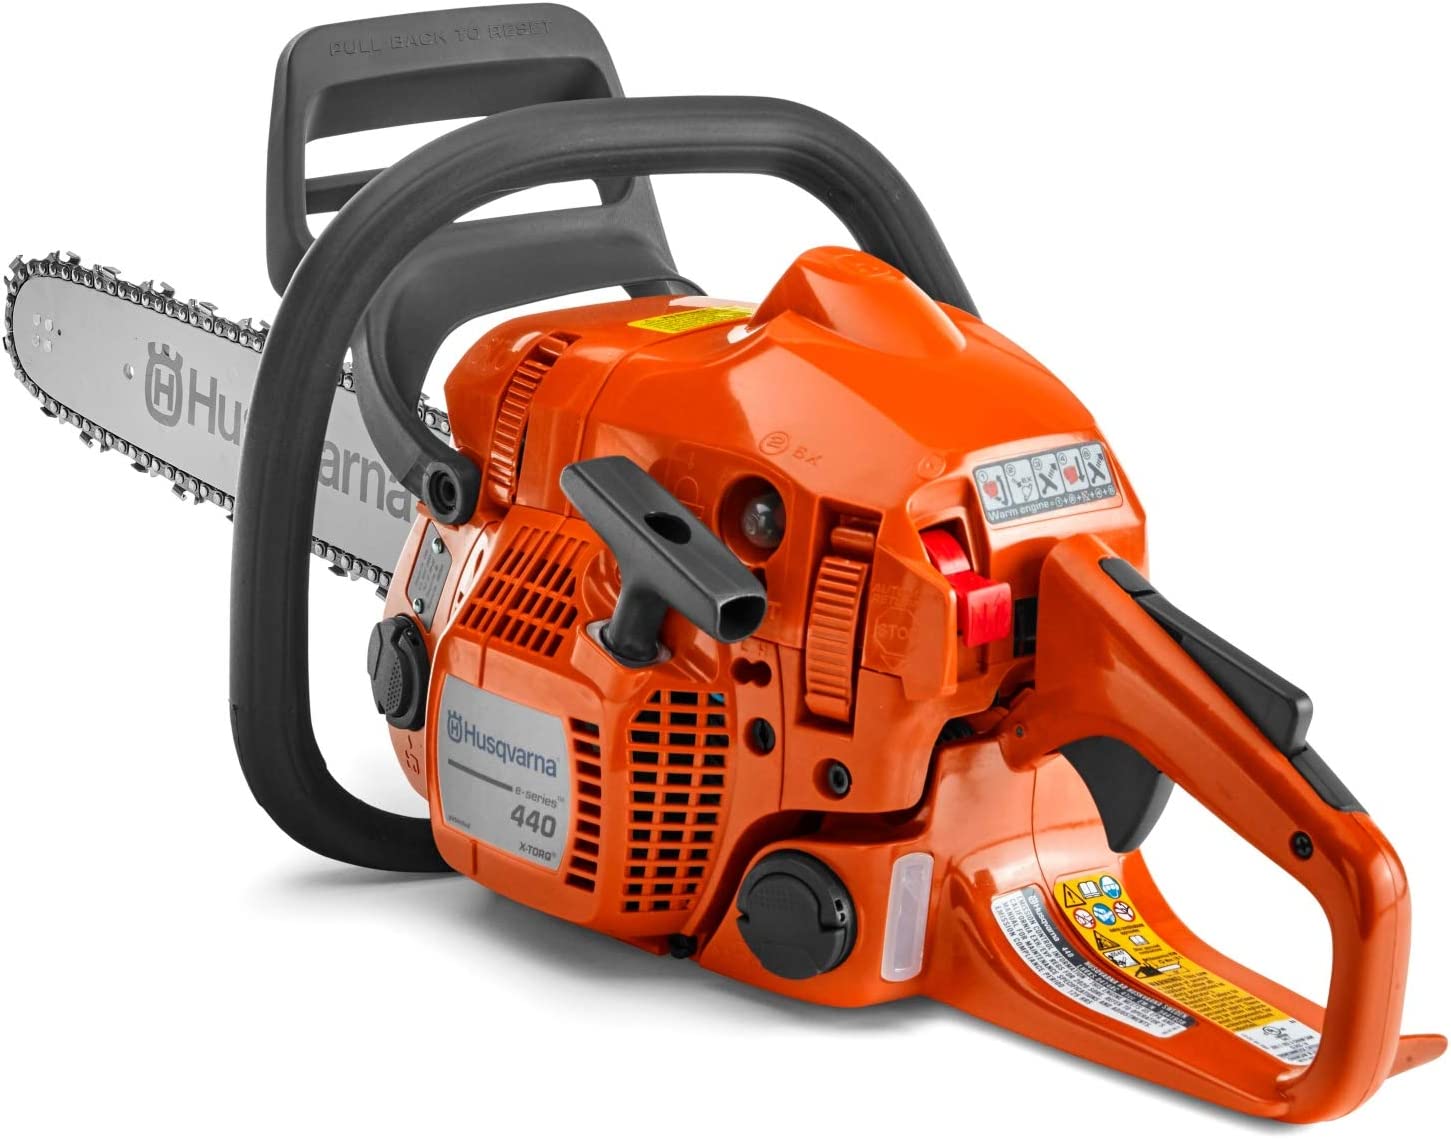 440 18" Chainsaw - .325 pitch, .050 gauge, 40.9cc - Click Image to Close